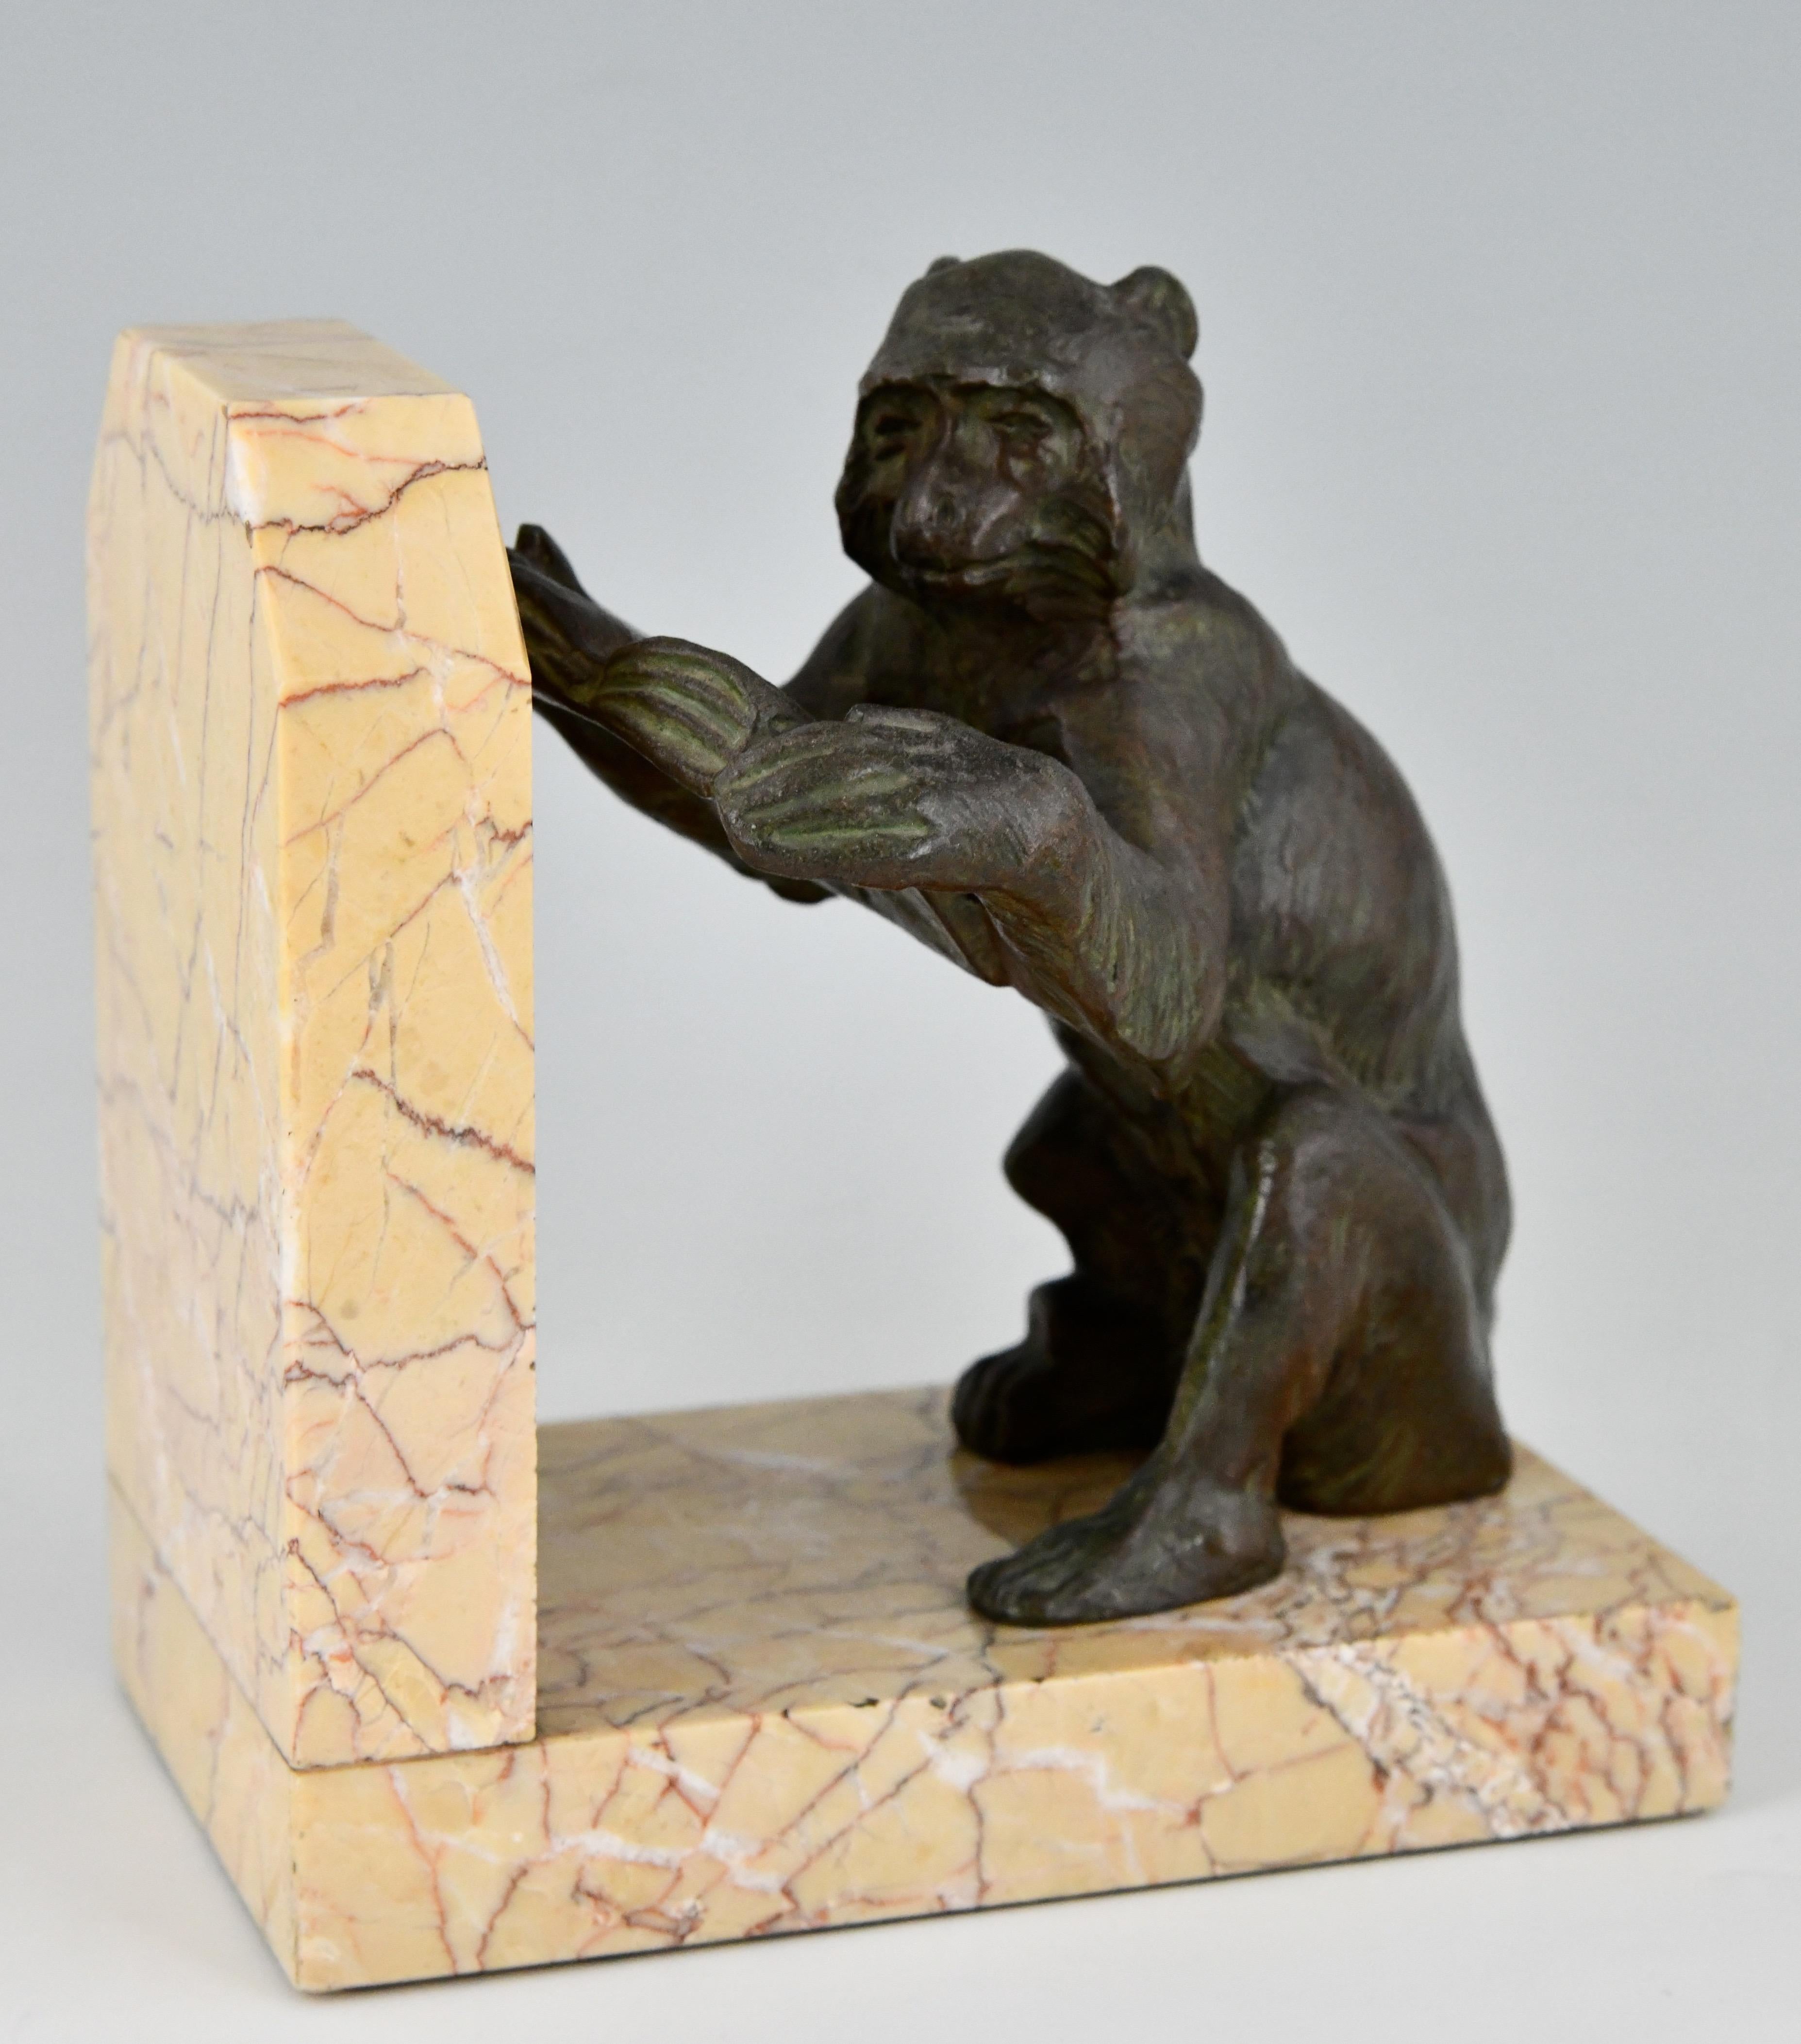 Patinated Art Deco Monkey Bookends by Carlier, France, 1930